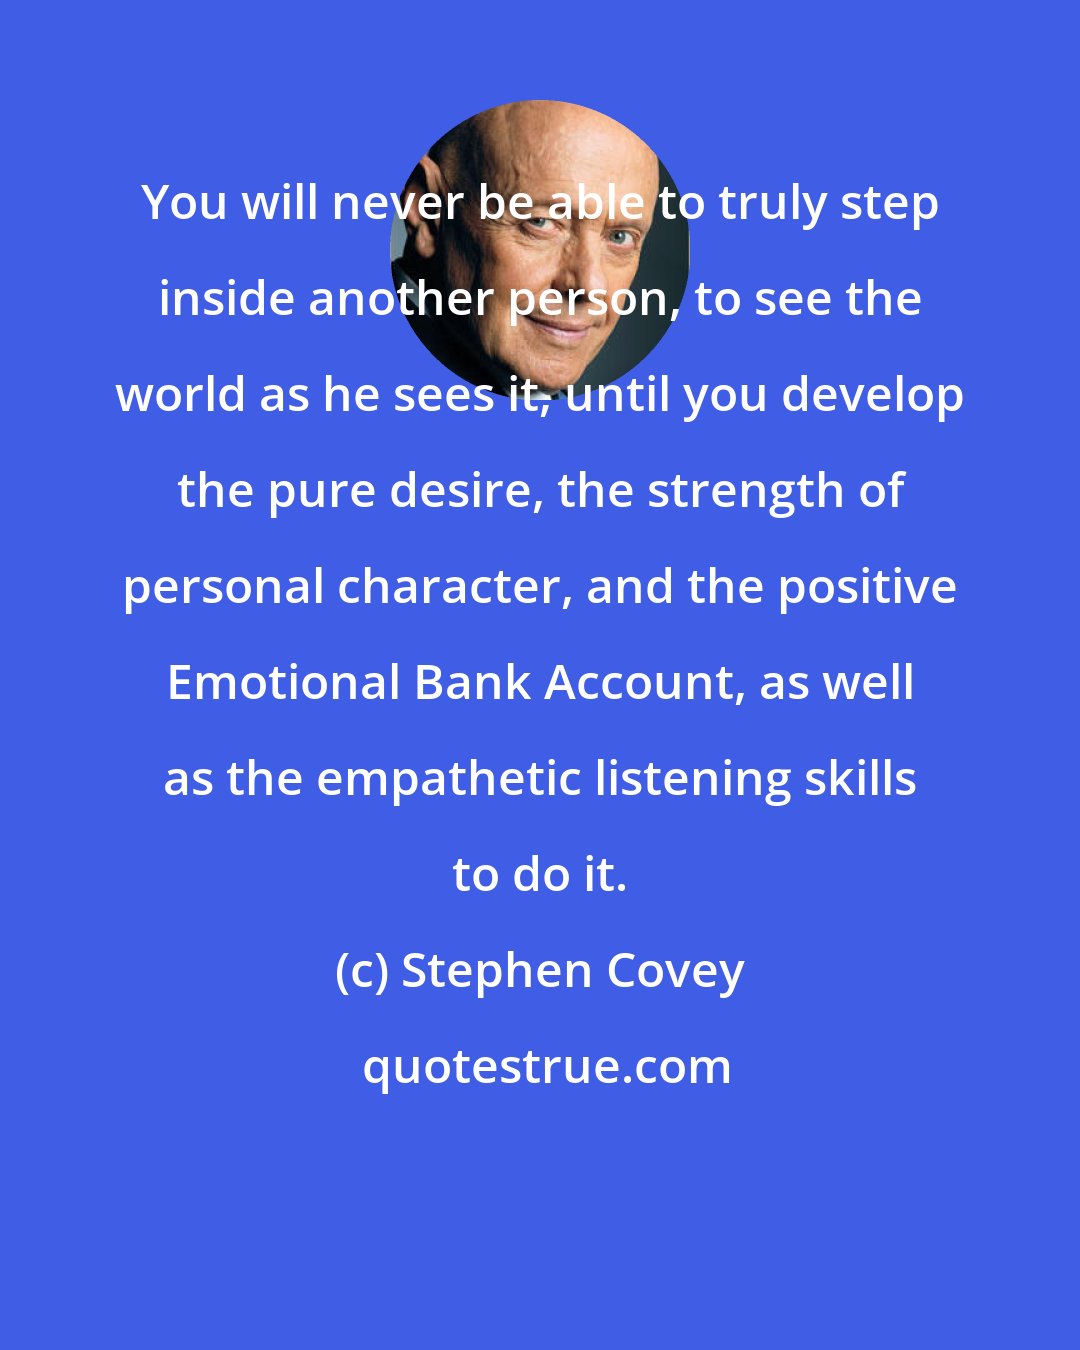 Stephen Covey: You will never be able to truly step inside another person, to see the world as he sees it, until you develop the pure desire, the strength of personal character, and the positive Emotional Bank Account, as well as the empathetic listening skills to do it.